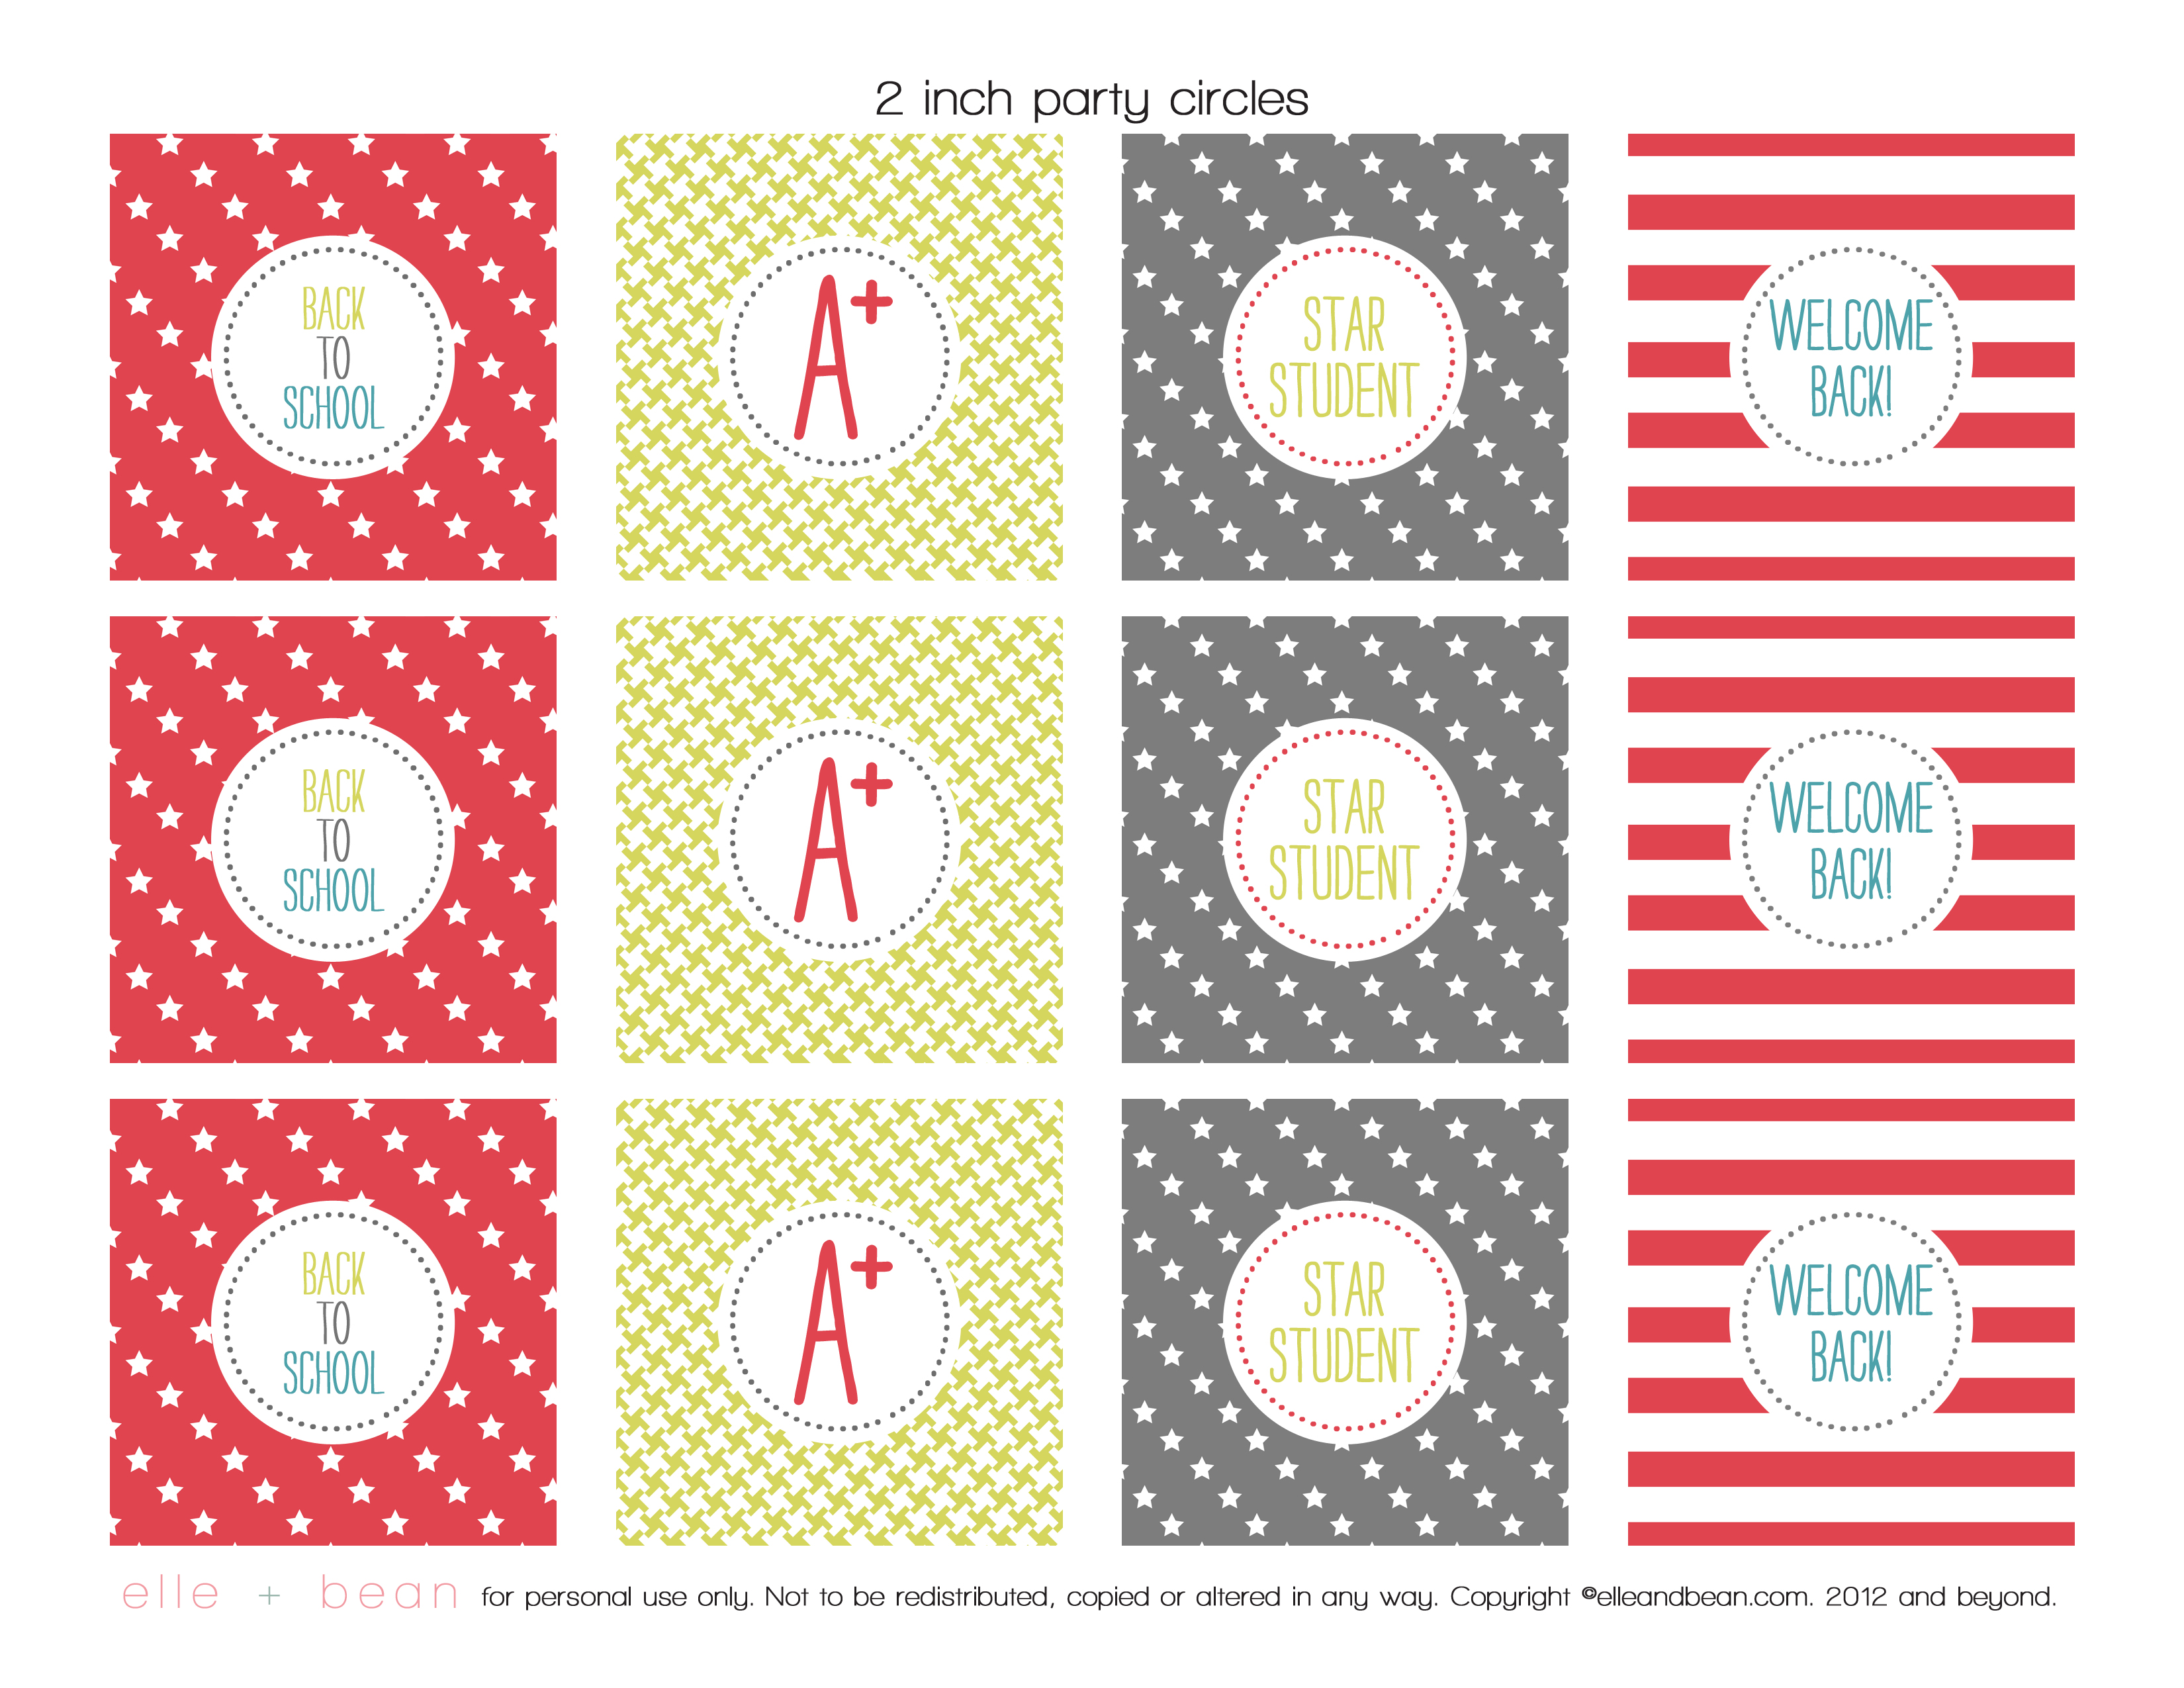 free-back-to-school-party-printables-from-ellen-bean-catch-my-party